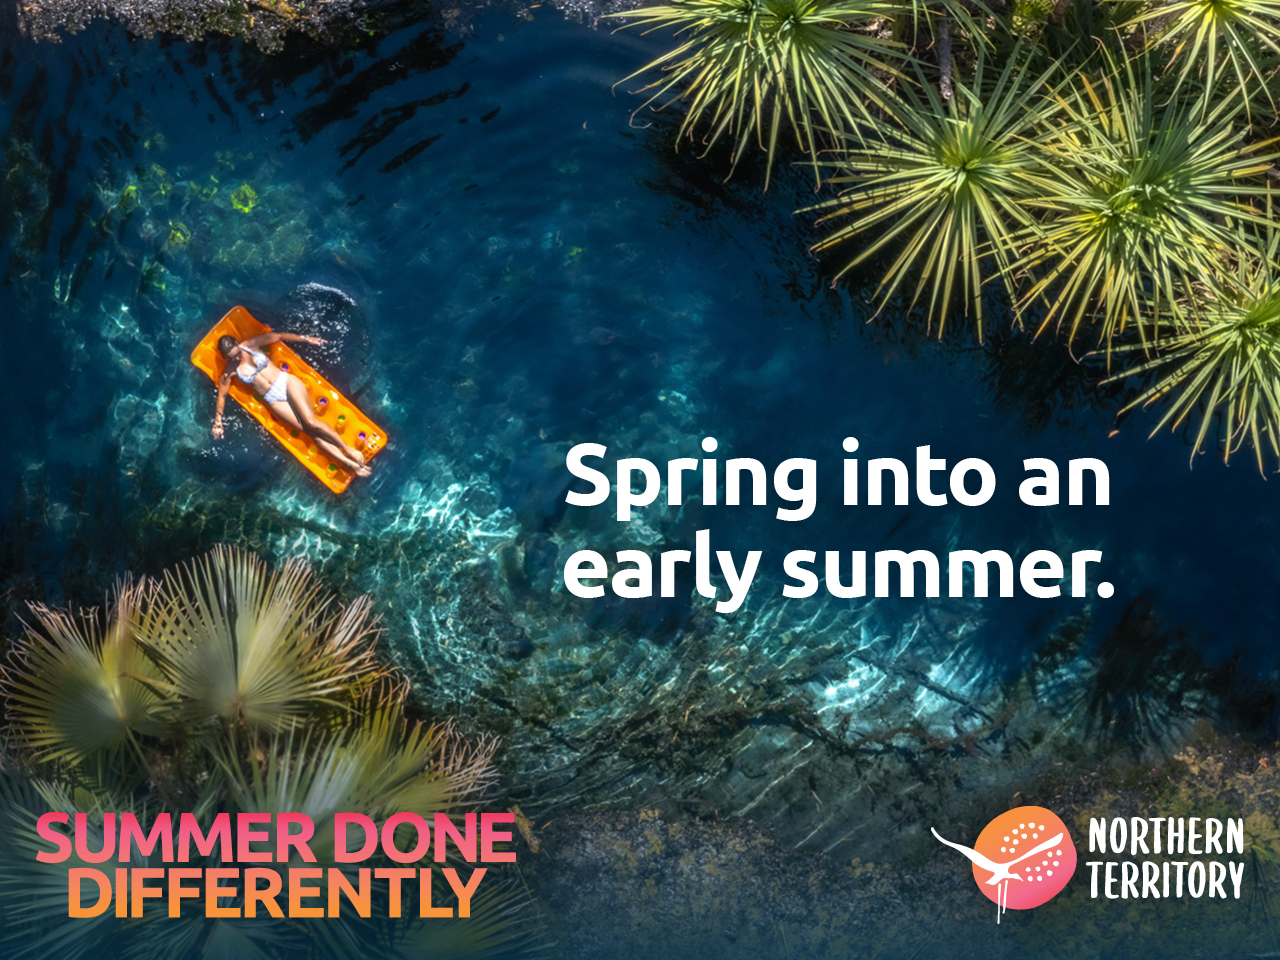 Summer done differently in the Territory 